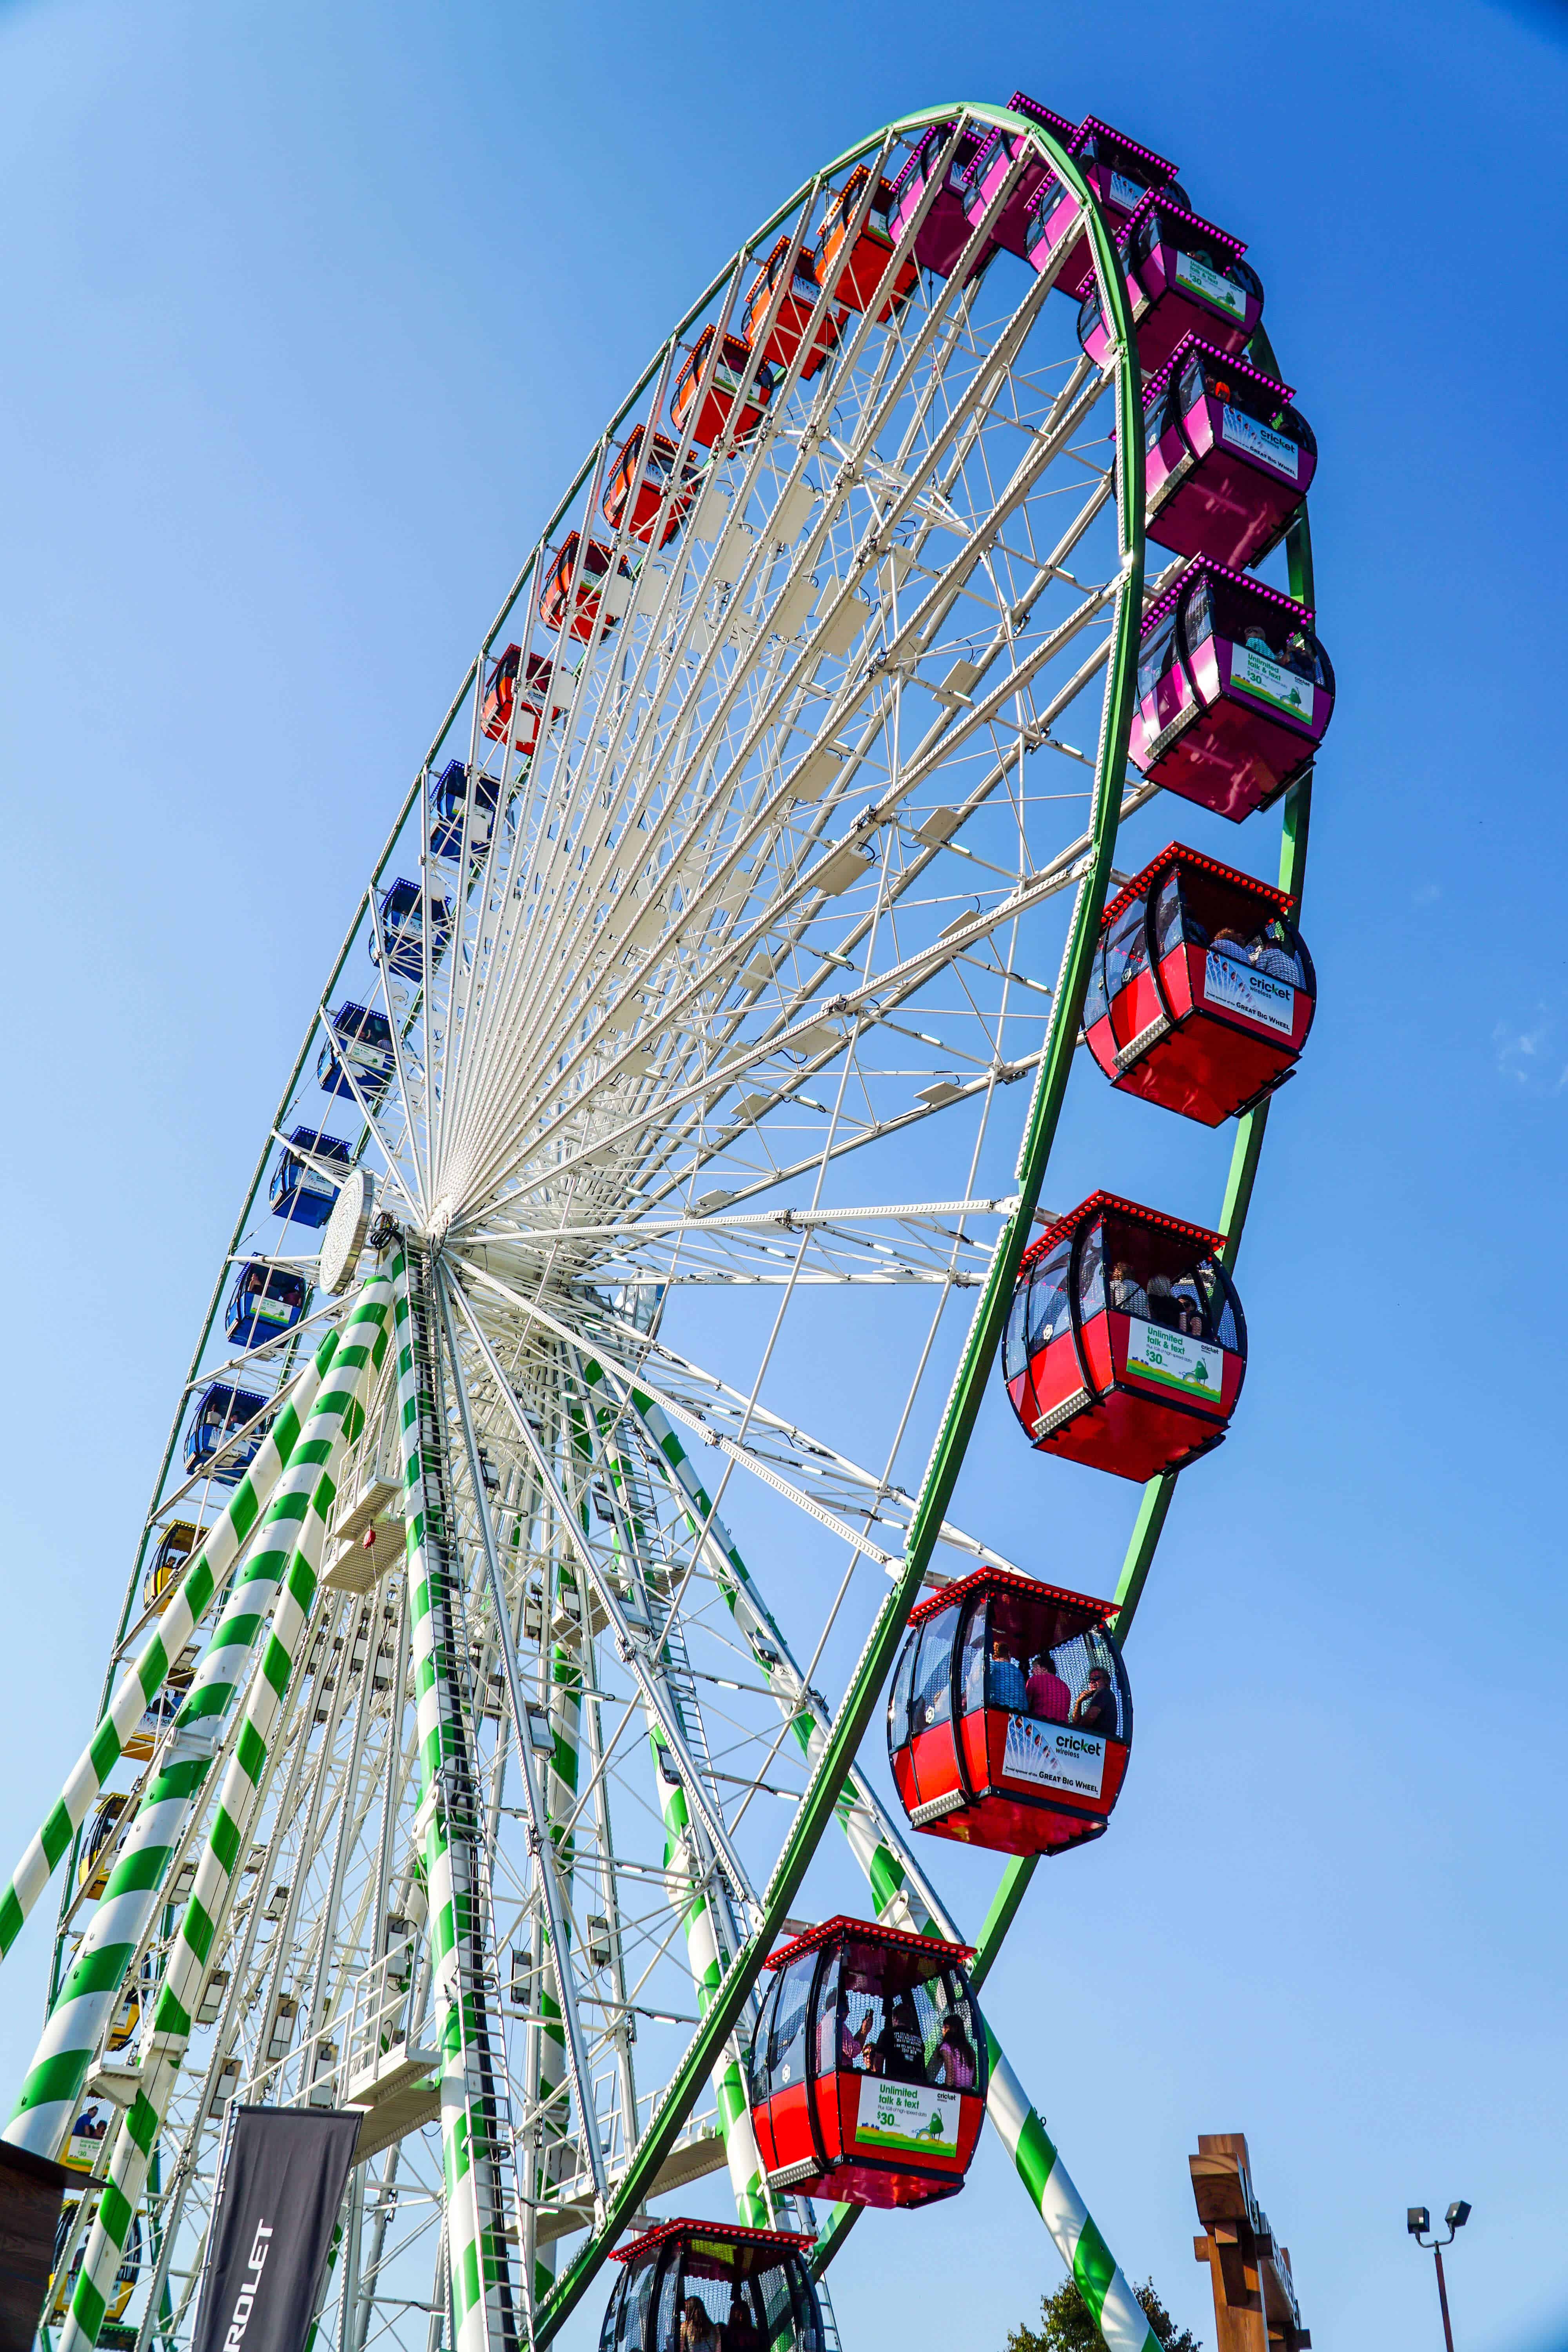 GUIDE TO THE MINNESOTA STATE FAIR | The Republic of Rose